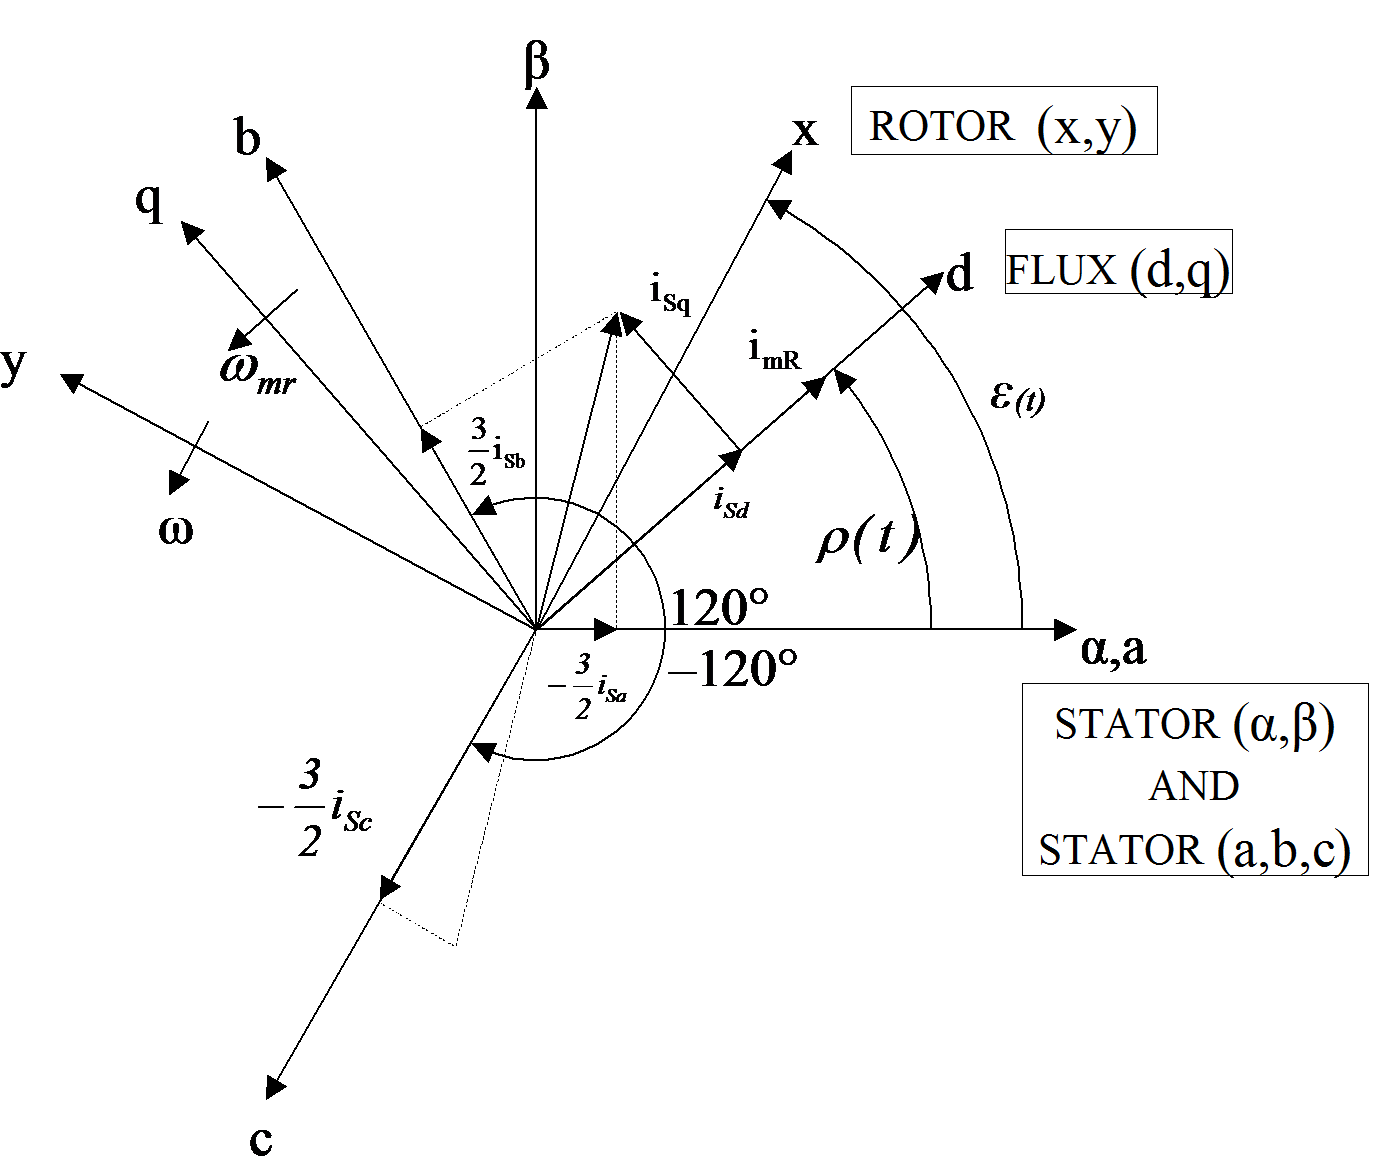 Connection between different coordinate systems